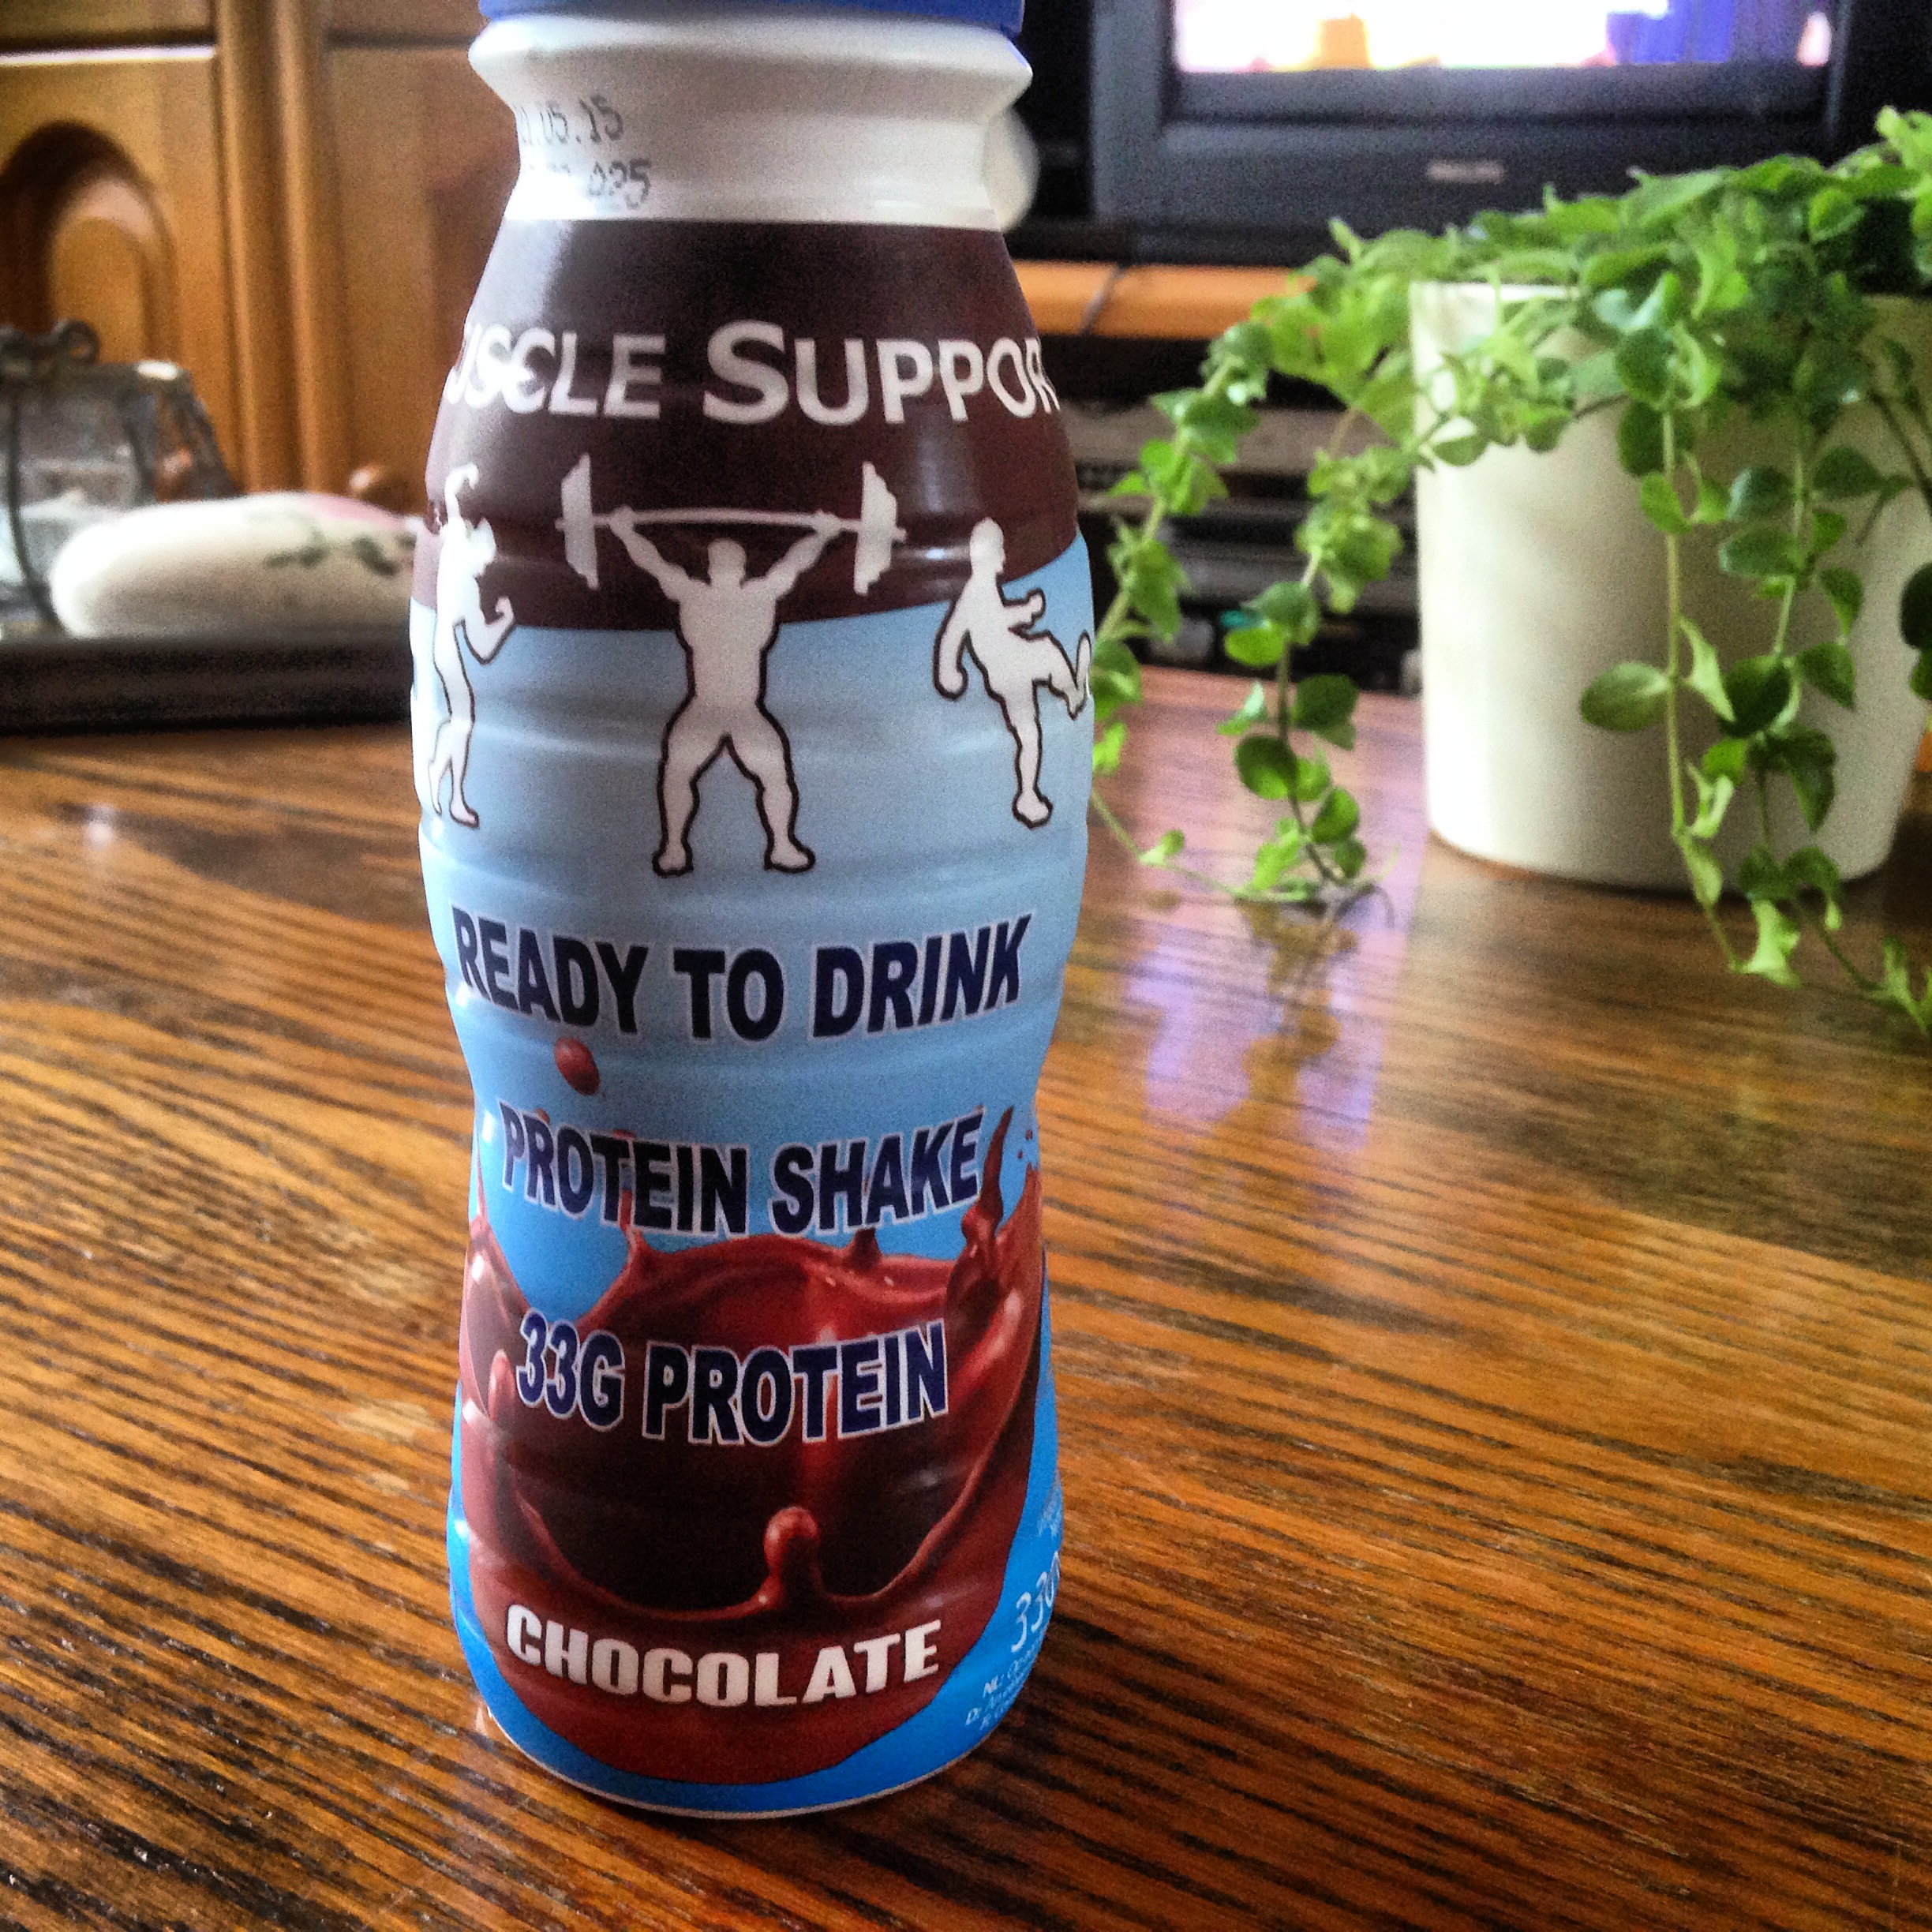 muscle support eiwit shake